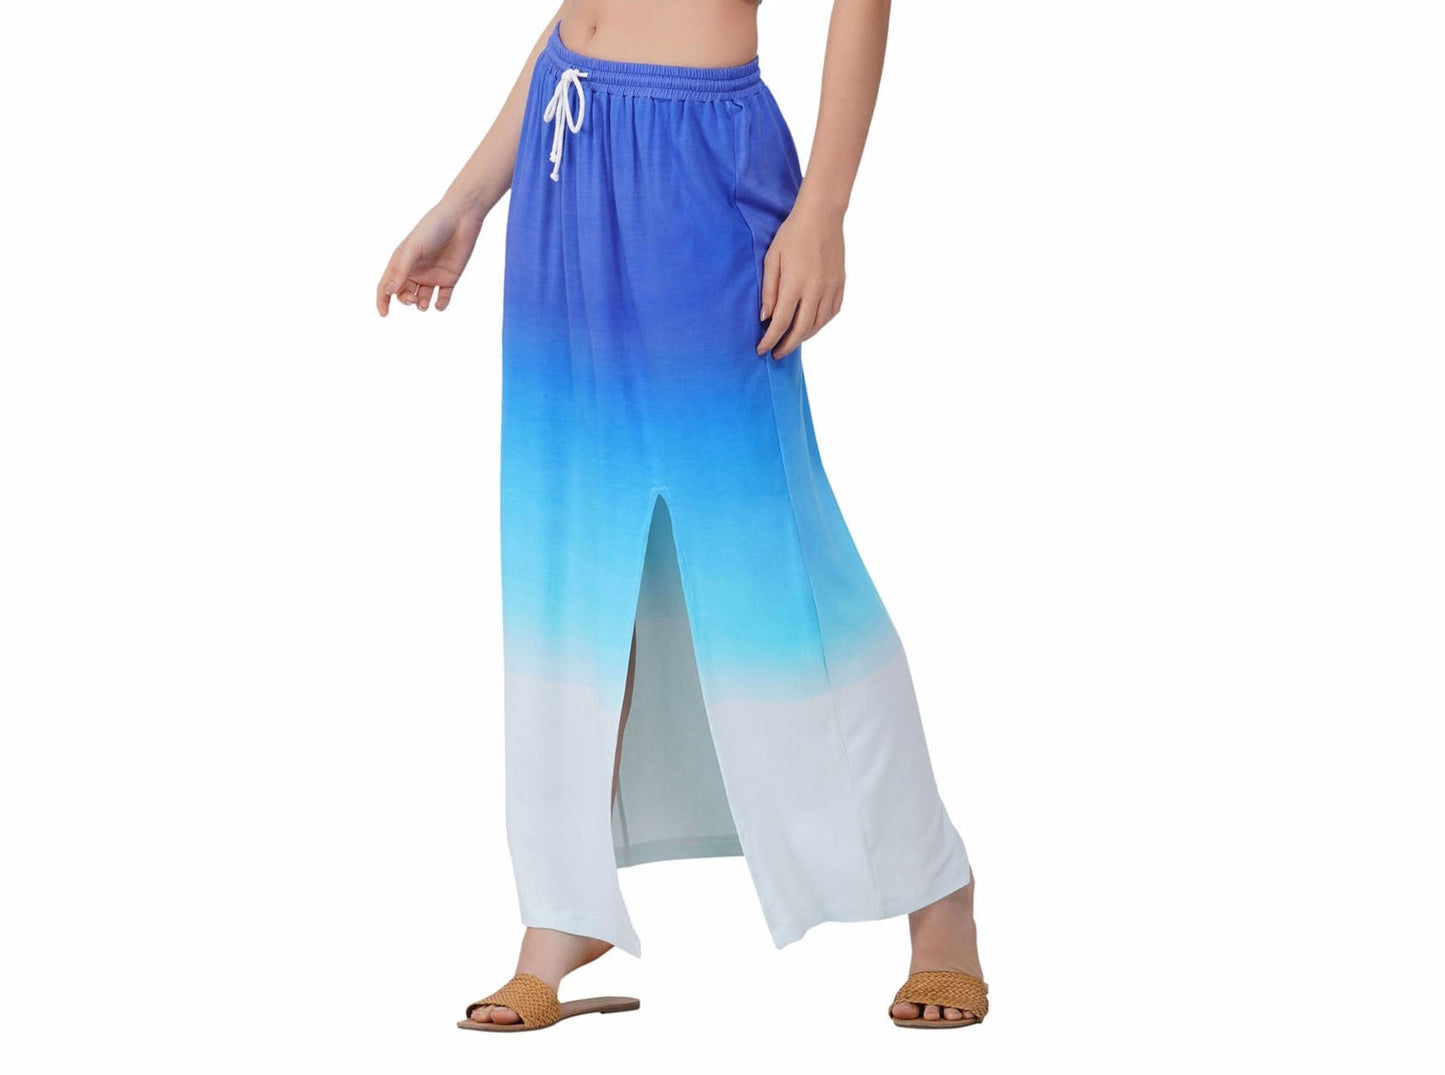 SLAY. Women's Blue to White Ombre Skirt with Slit